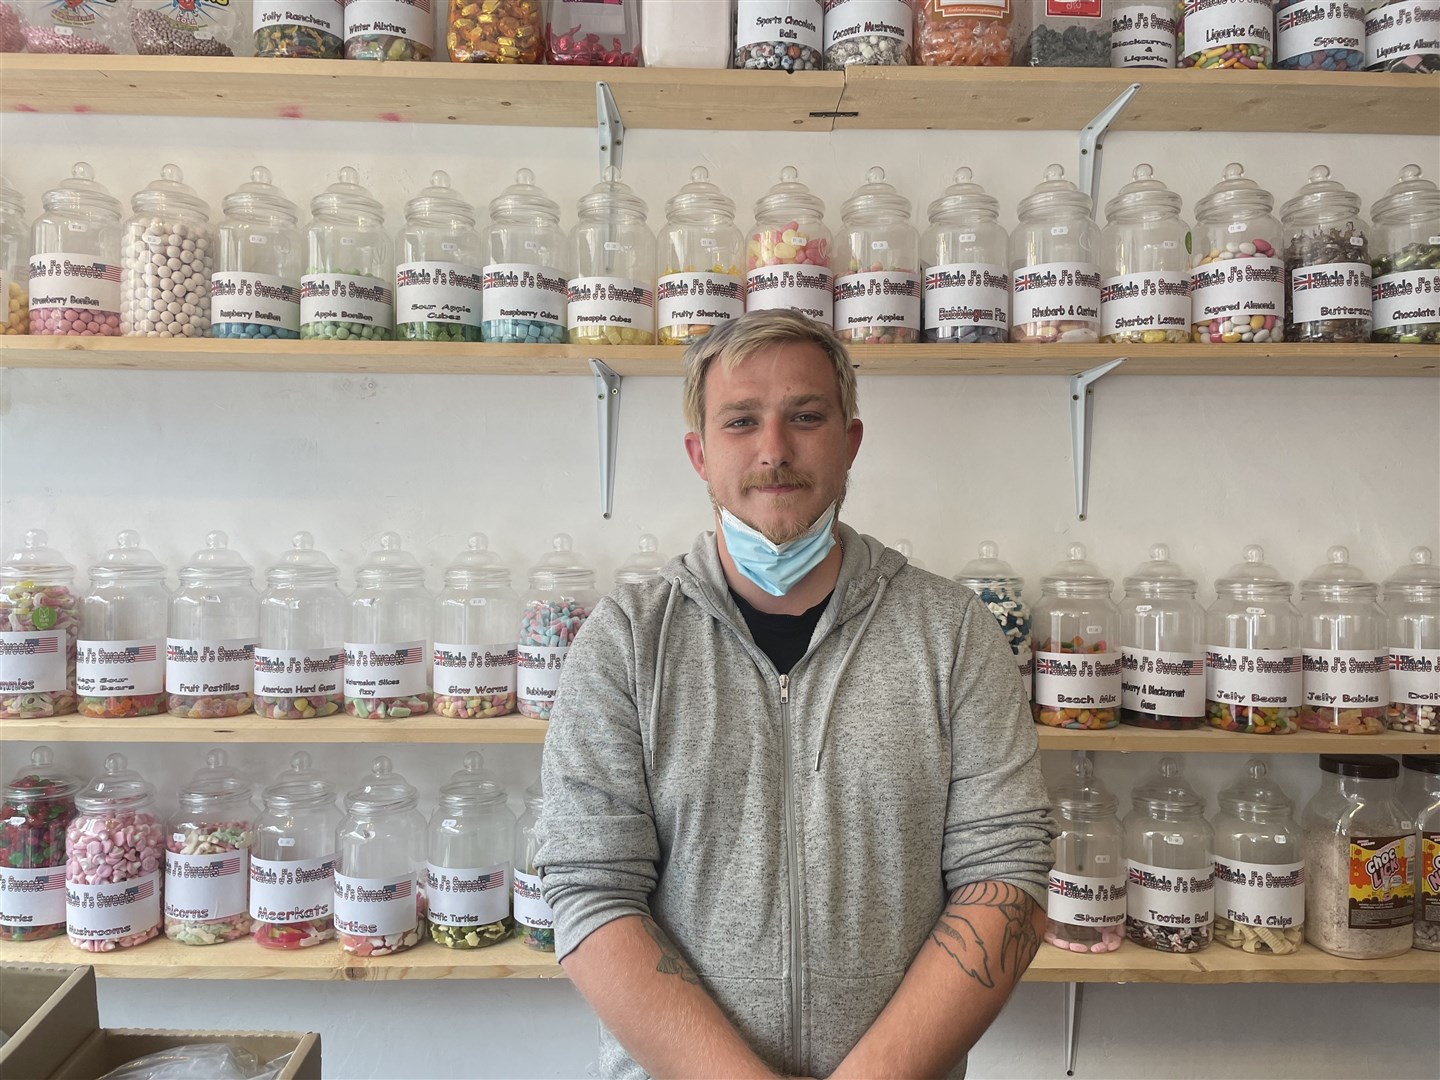 Clinton Matthews, owner of J’s Sweets, inside his shop in St Ives (Isobel Frodsham/PA)